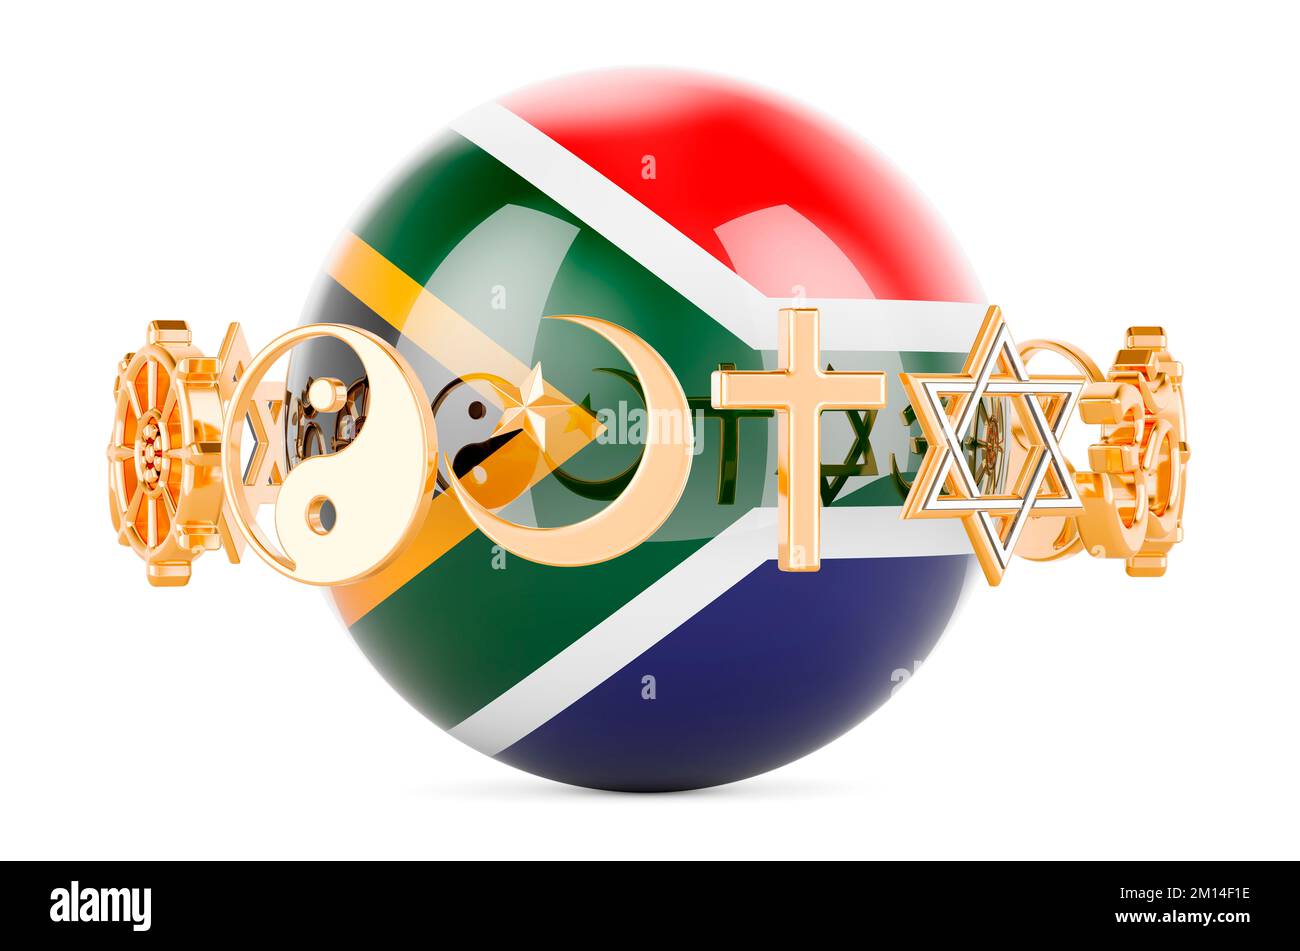 South African flag painted on sphere with religions symbols around, 3D rendering isolated on white background Stock Photo